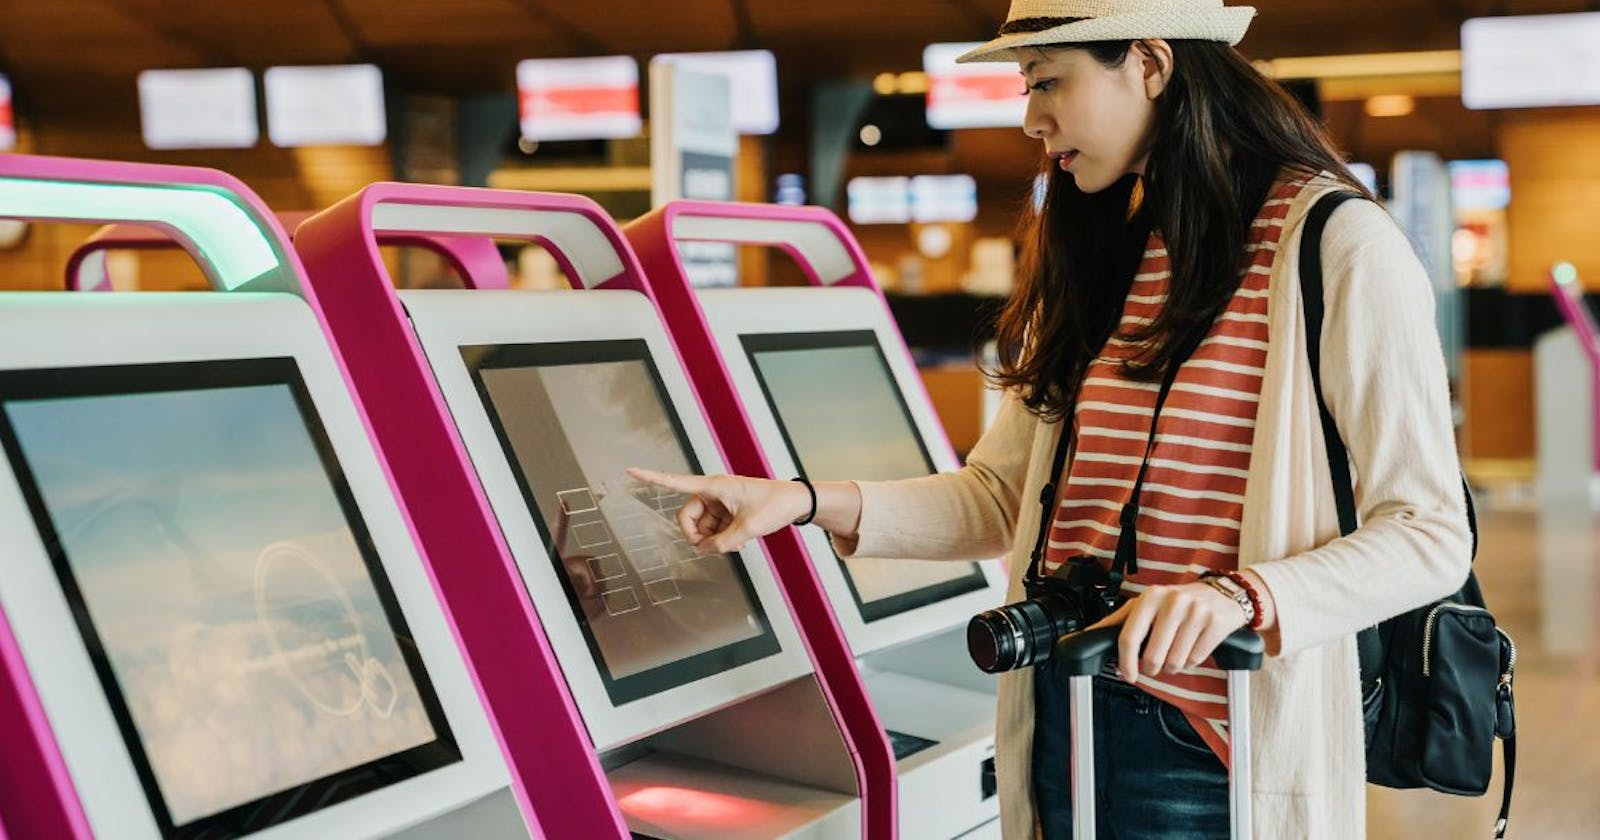 How Can Businesses Benefit From Self-Service Kiosks?